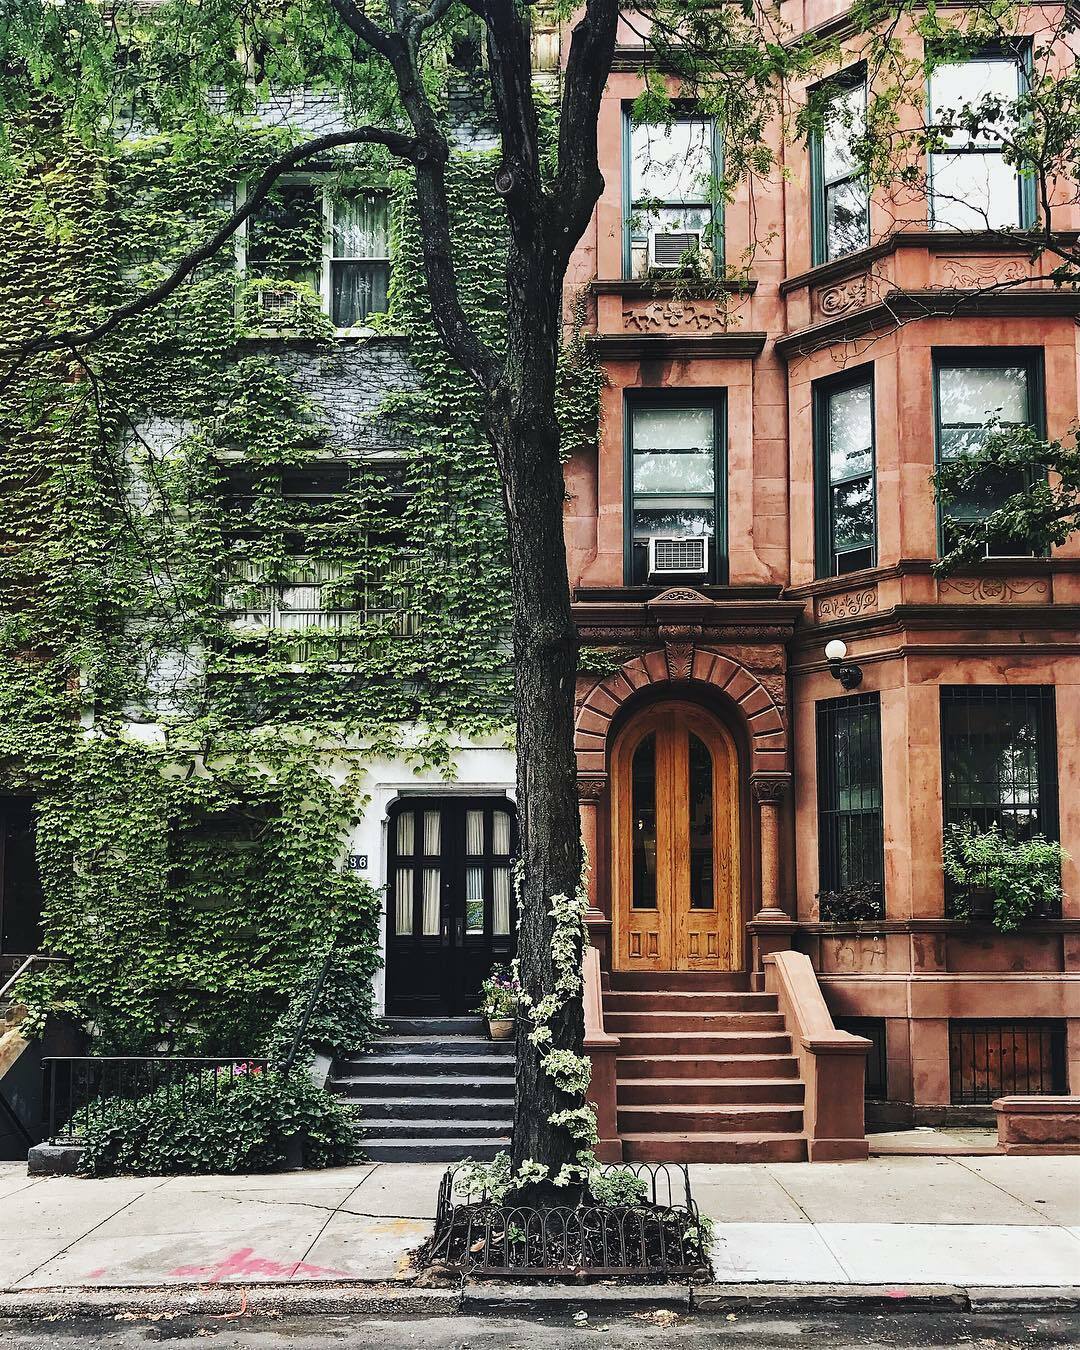 Architectural Juxtaposition In Clinton Hill Historic District, Which Consists Of 1,063 Largely Residential Buildings Built Between The 1840s And 1930 In Contemporary And Revival Styles Popular At The Time, Clinton Hill, Brooklyn, New York City